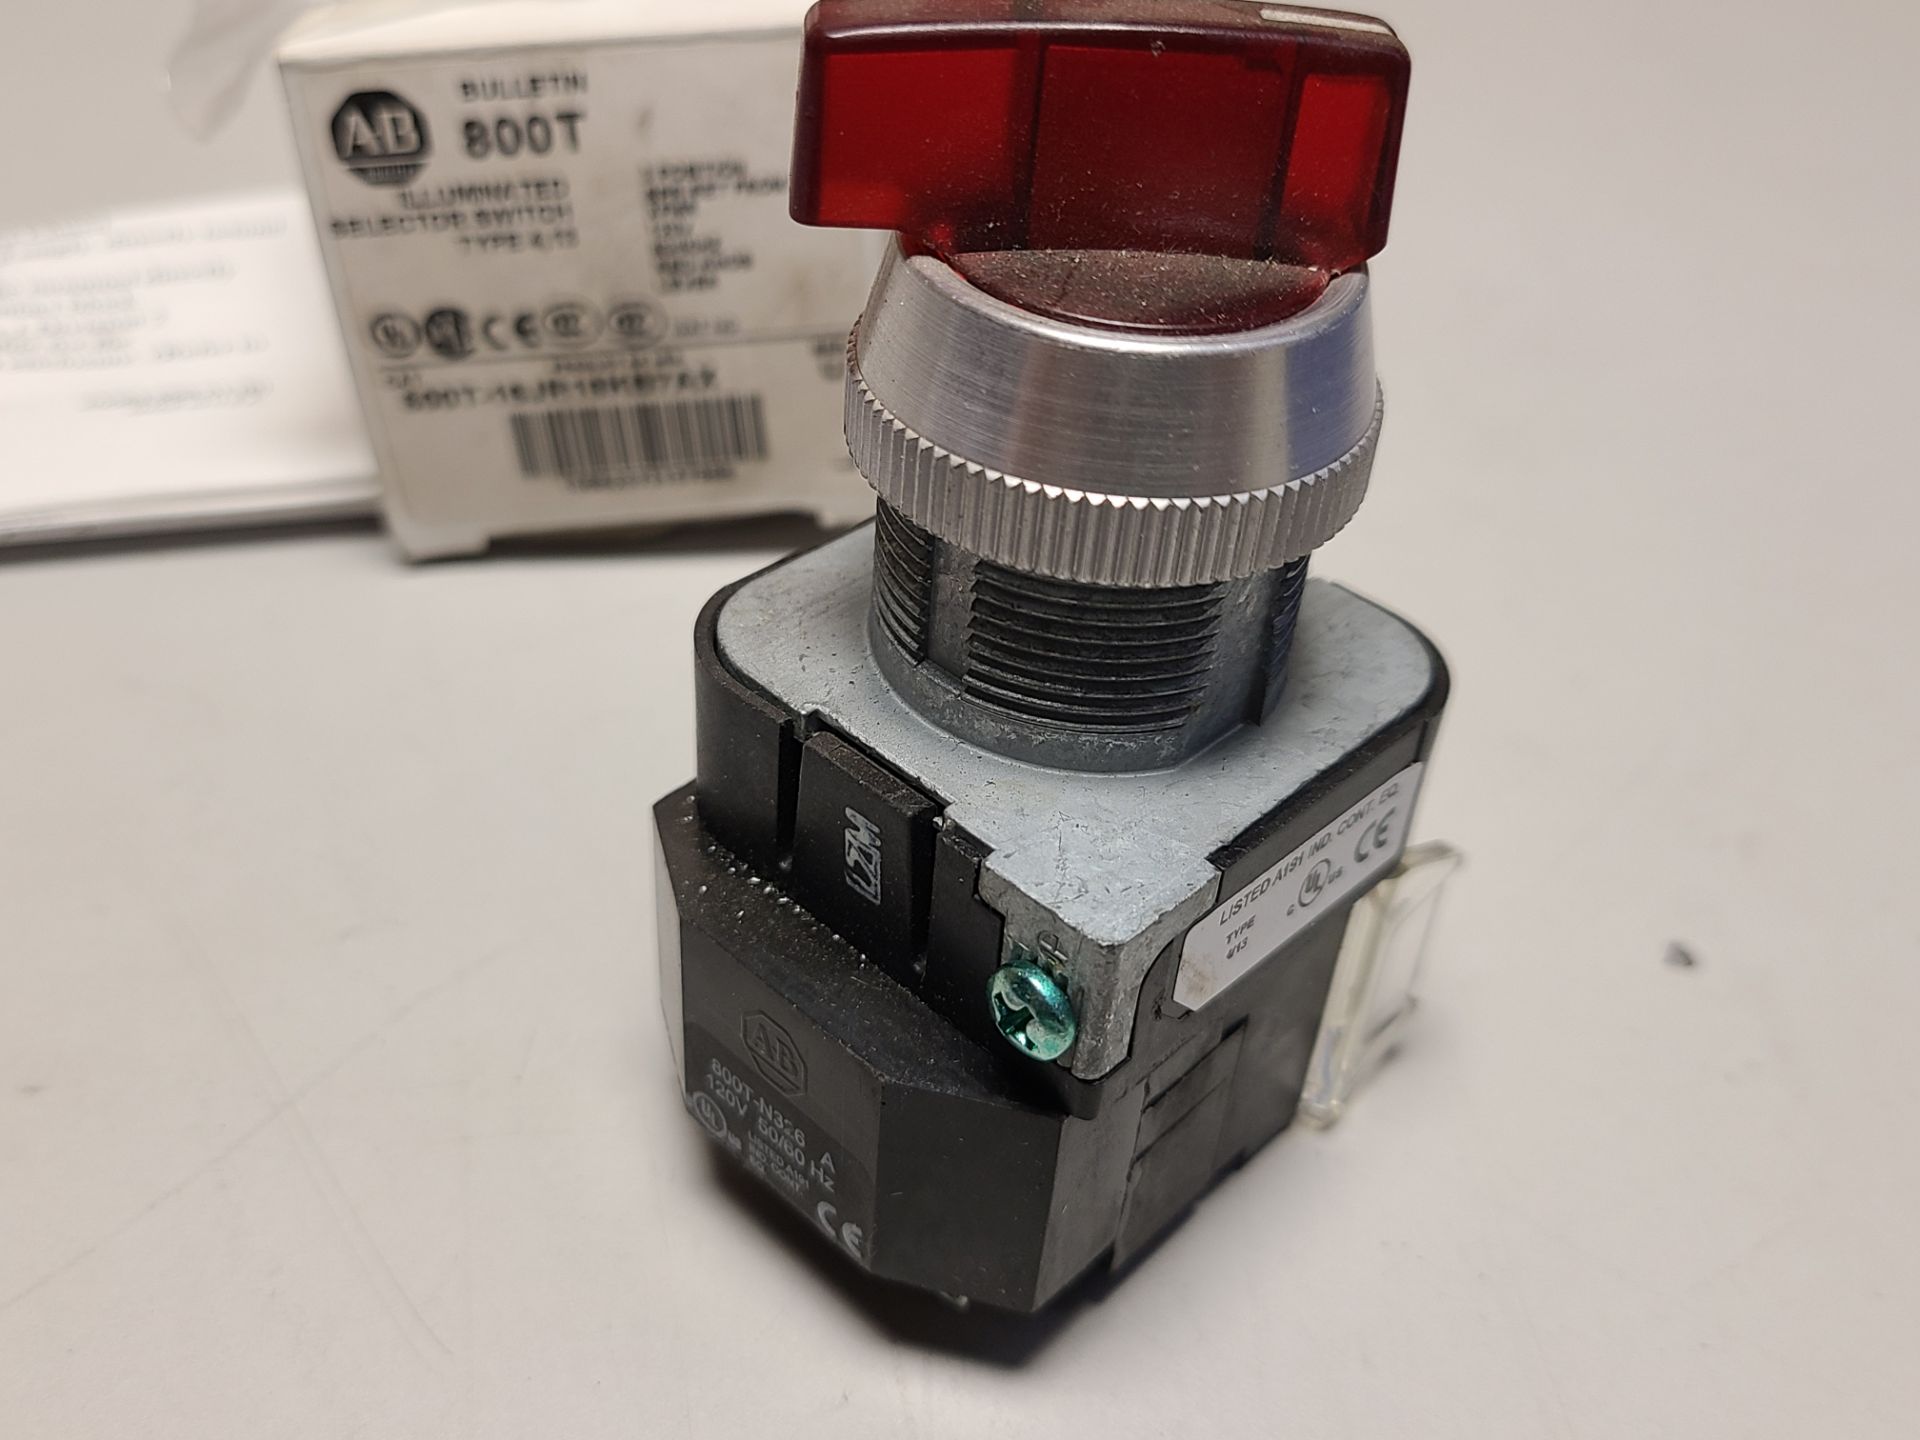 NEW ALLEN BRADLEY ILLUMINATED SELECTOR SWITCH - Image 3 of 3